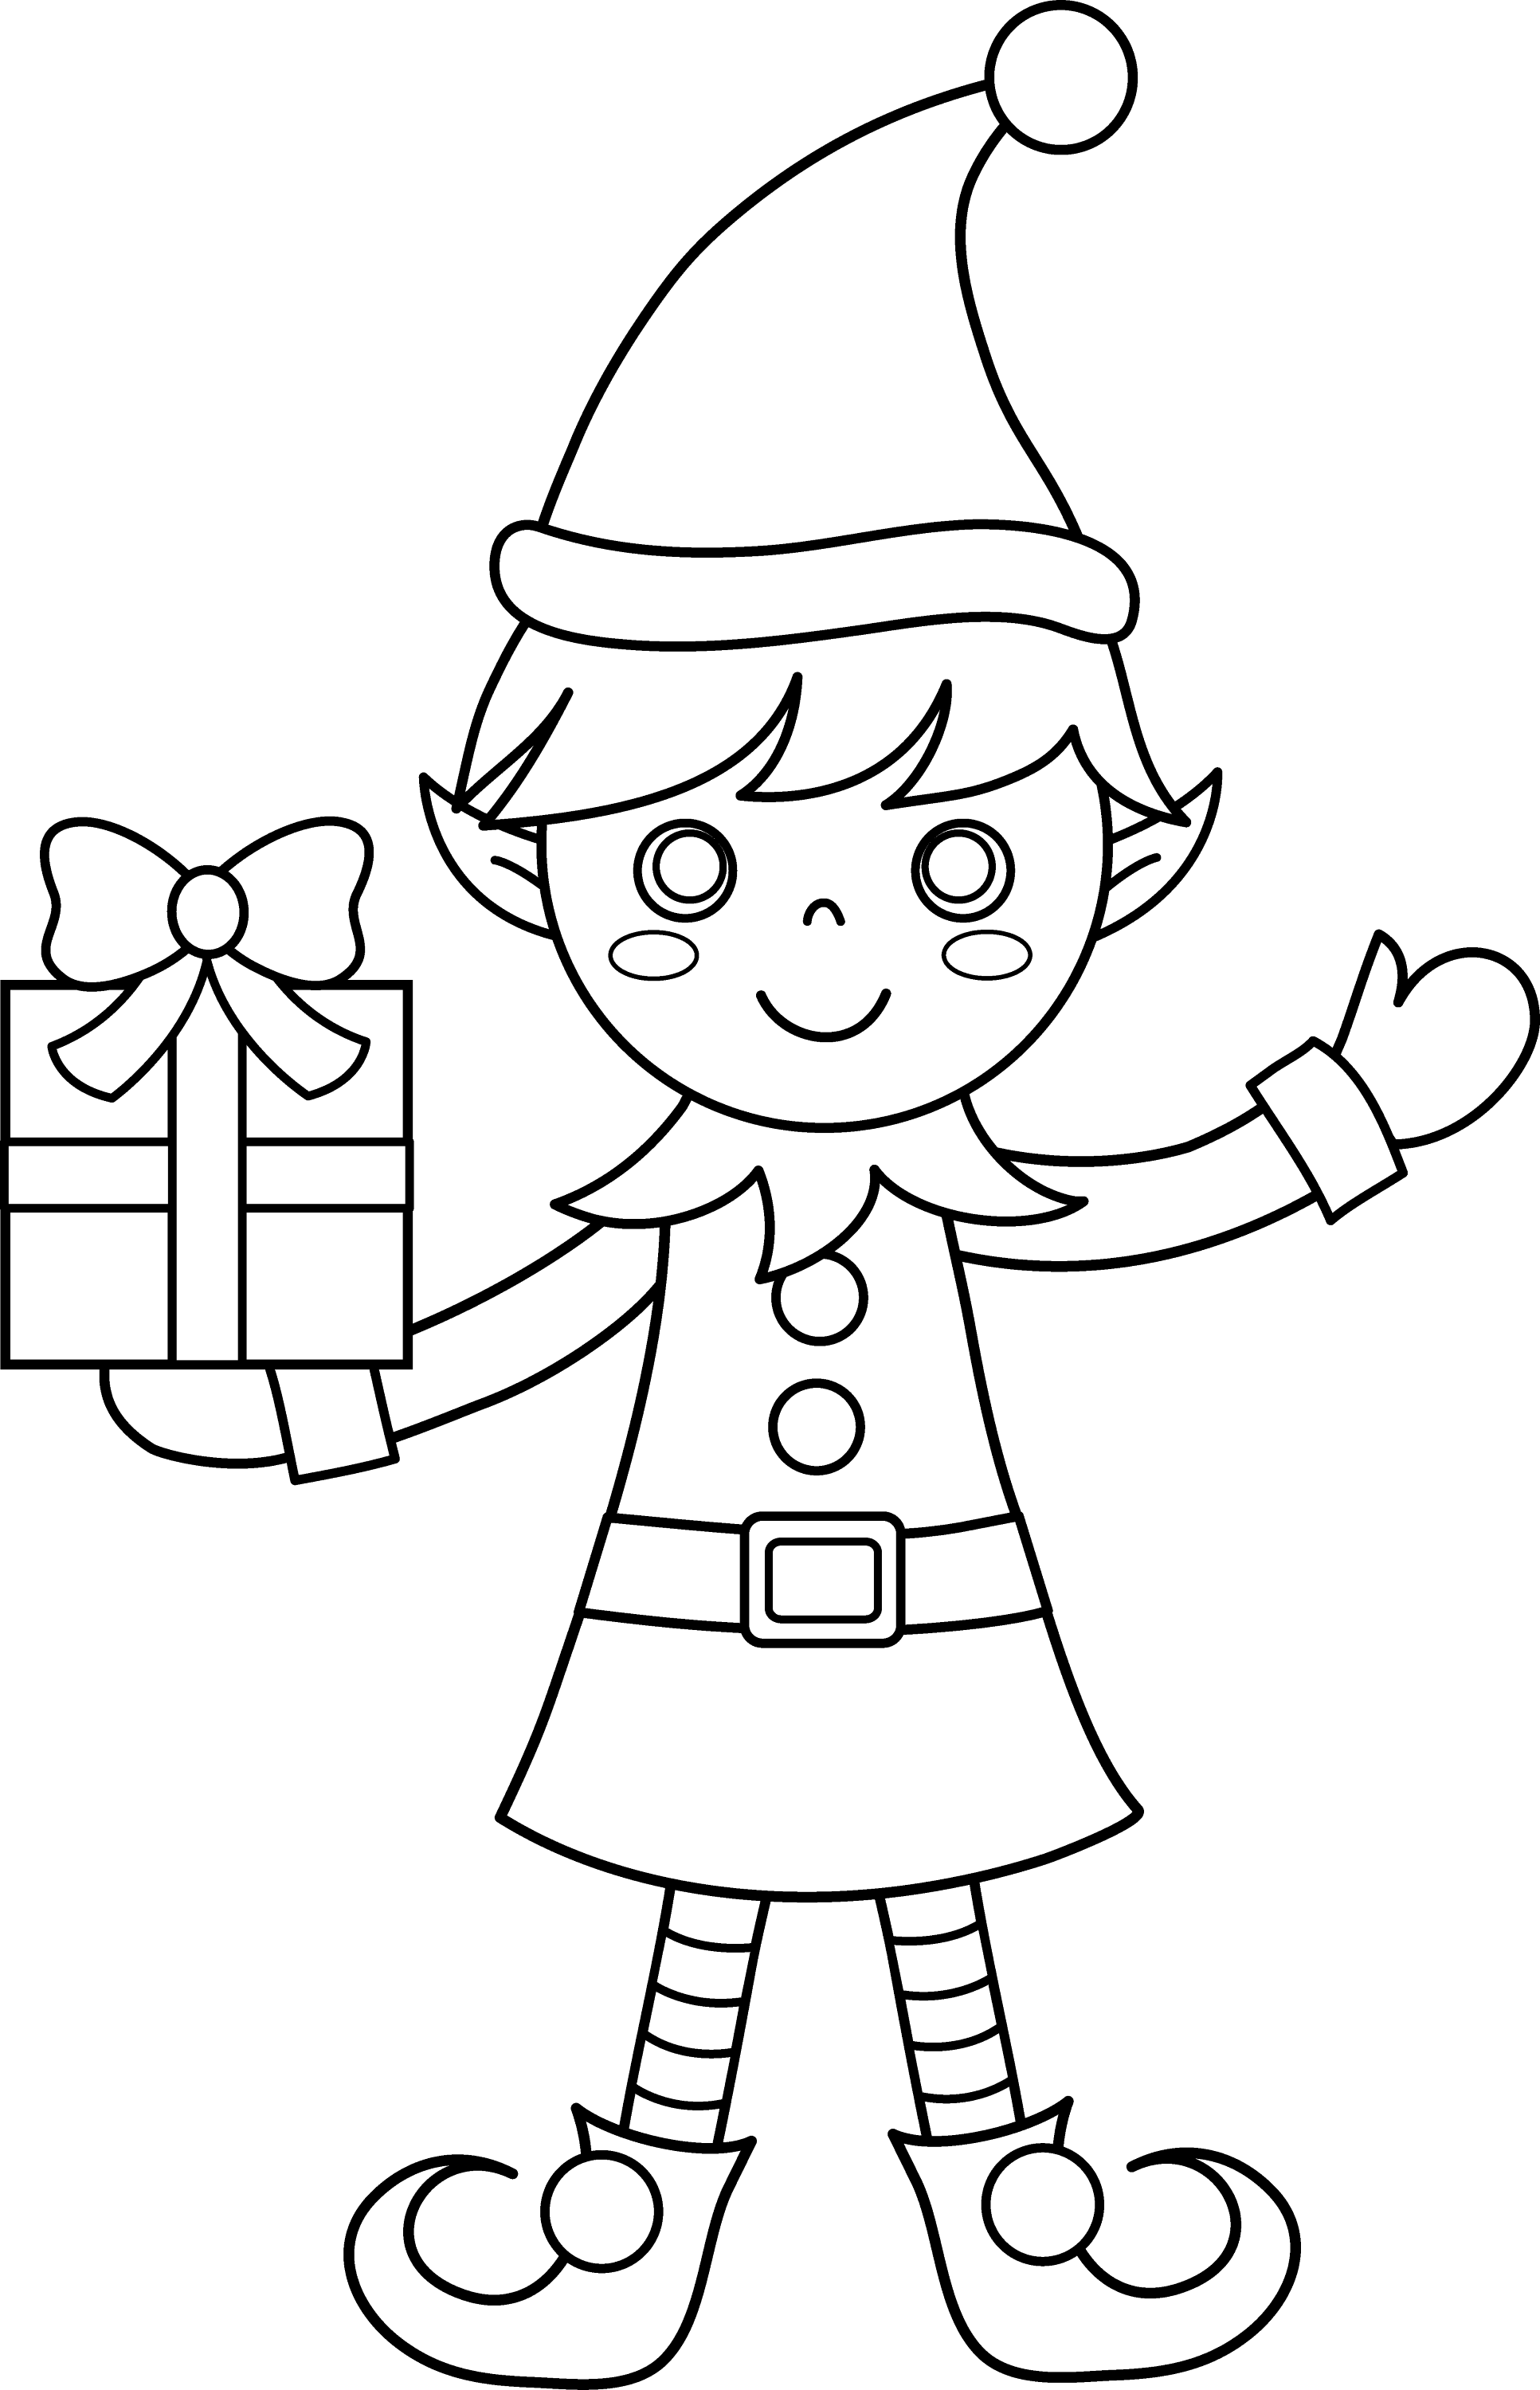 Christmas Elf Coloring Page Free Clip Art